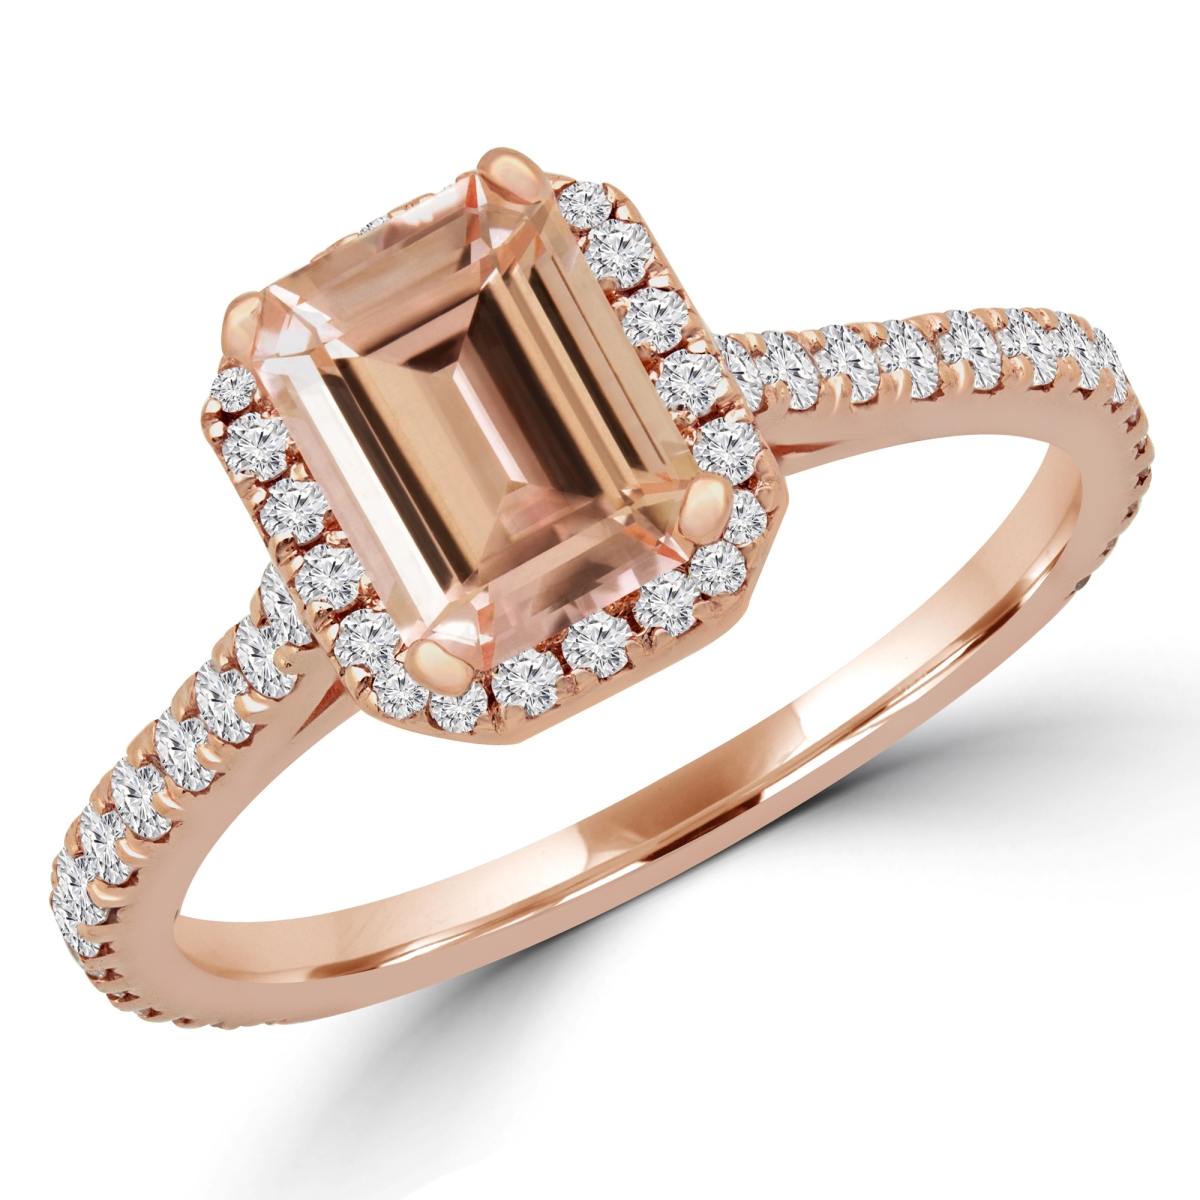 Picture of Majesty Diamonds MD180580-4.75 1.25 CTW Emerald Pink Morganite Halo Engagement Ring in 14K Rose Gold - Size 4.75